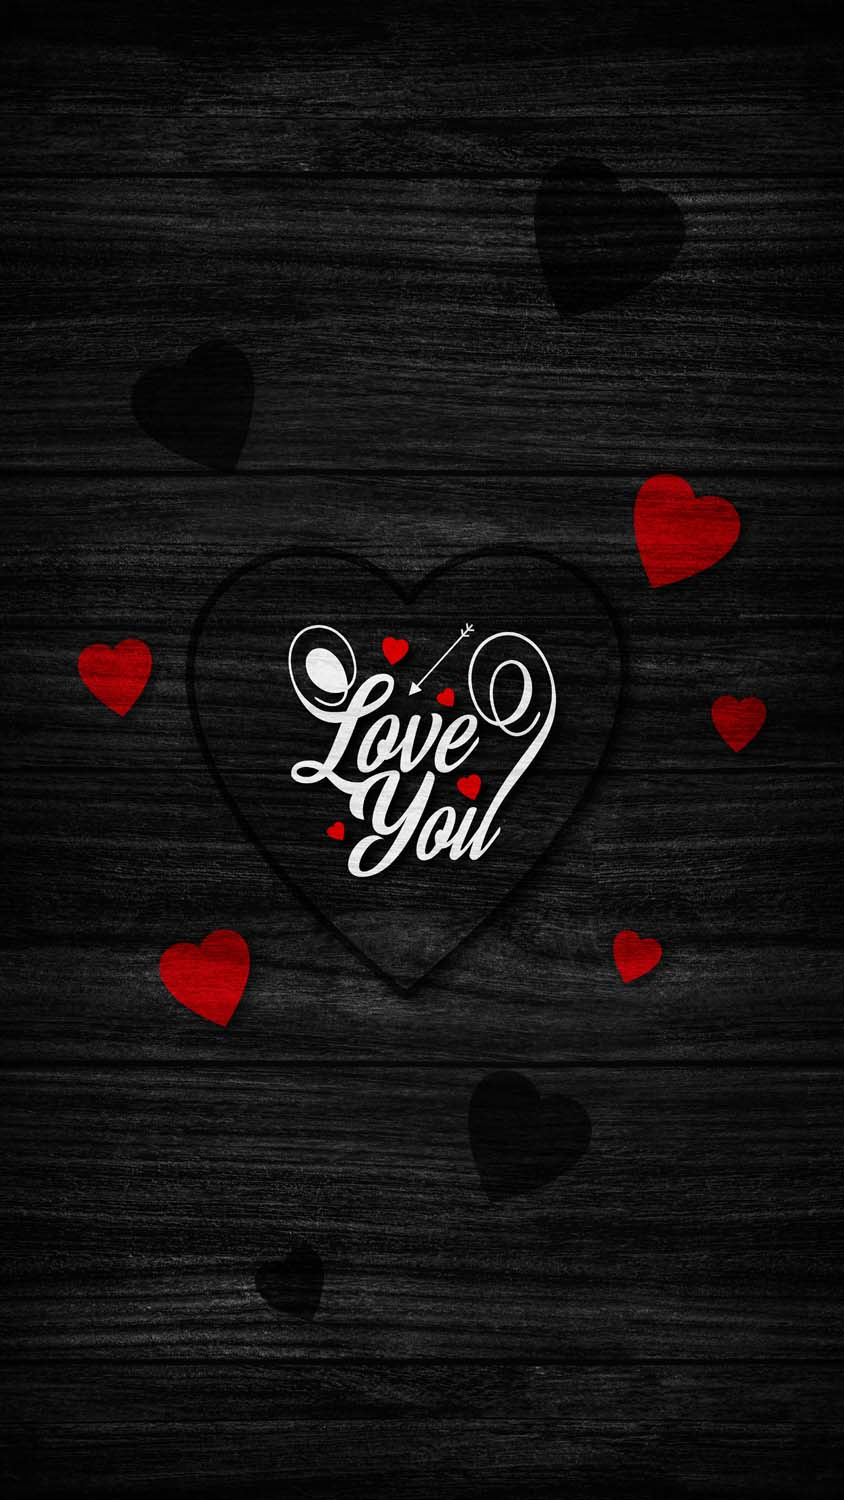 Love You IPhone Wallpaper HD  IPhone Wallpapers